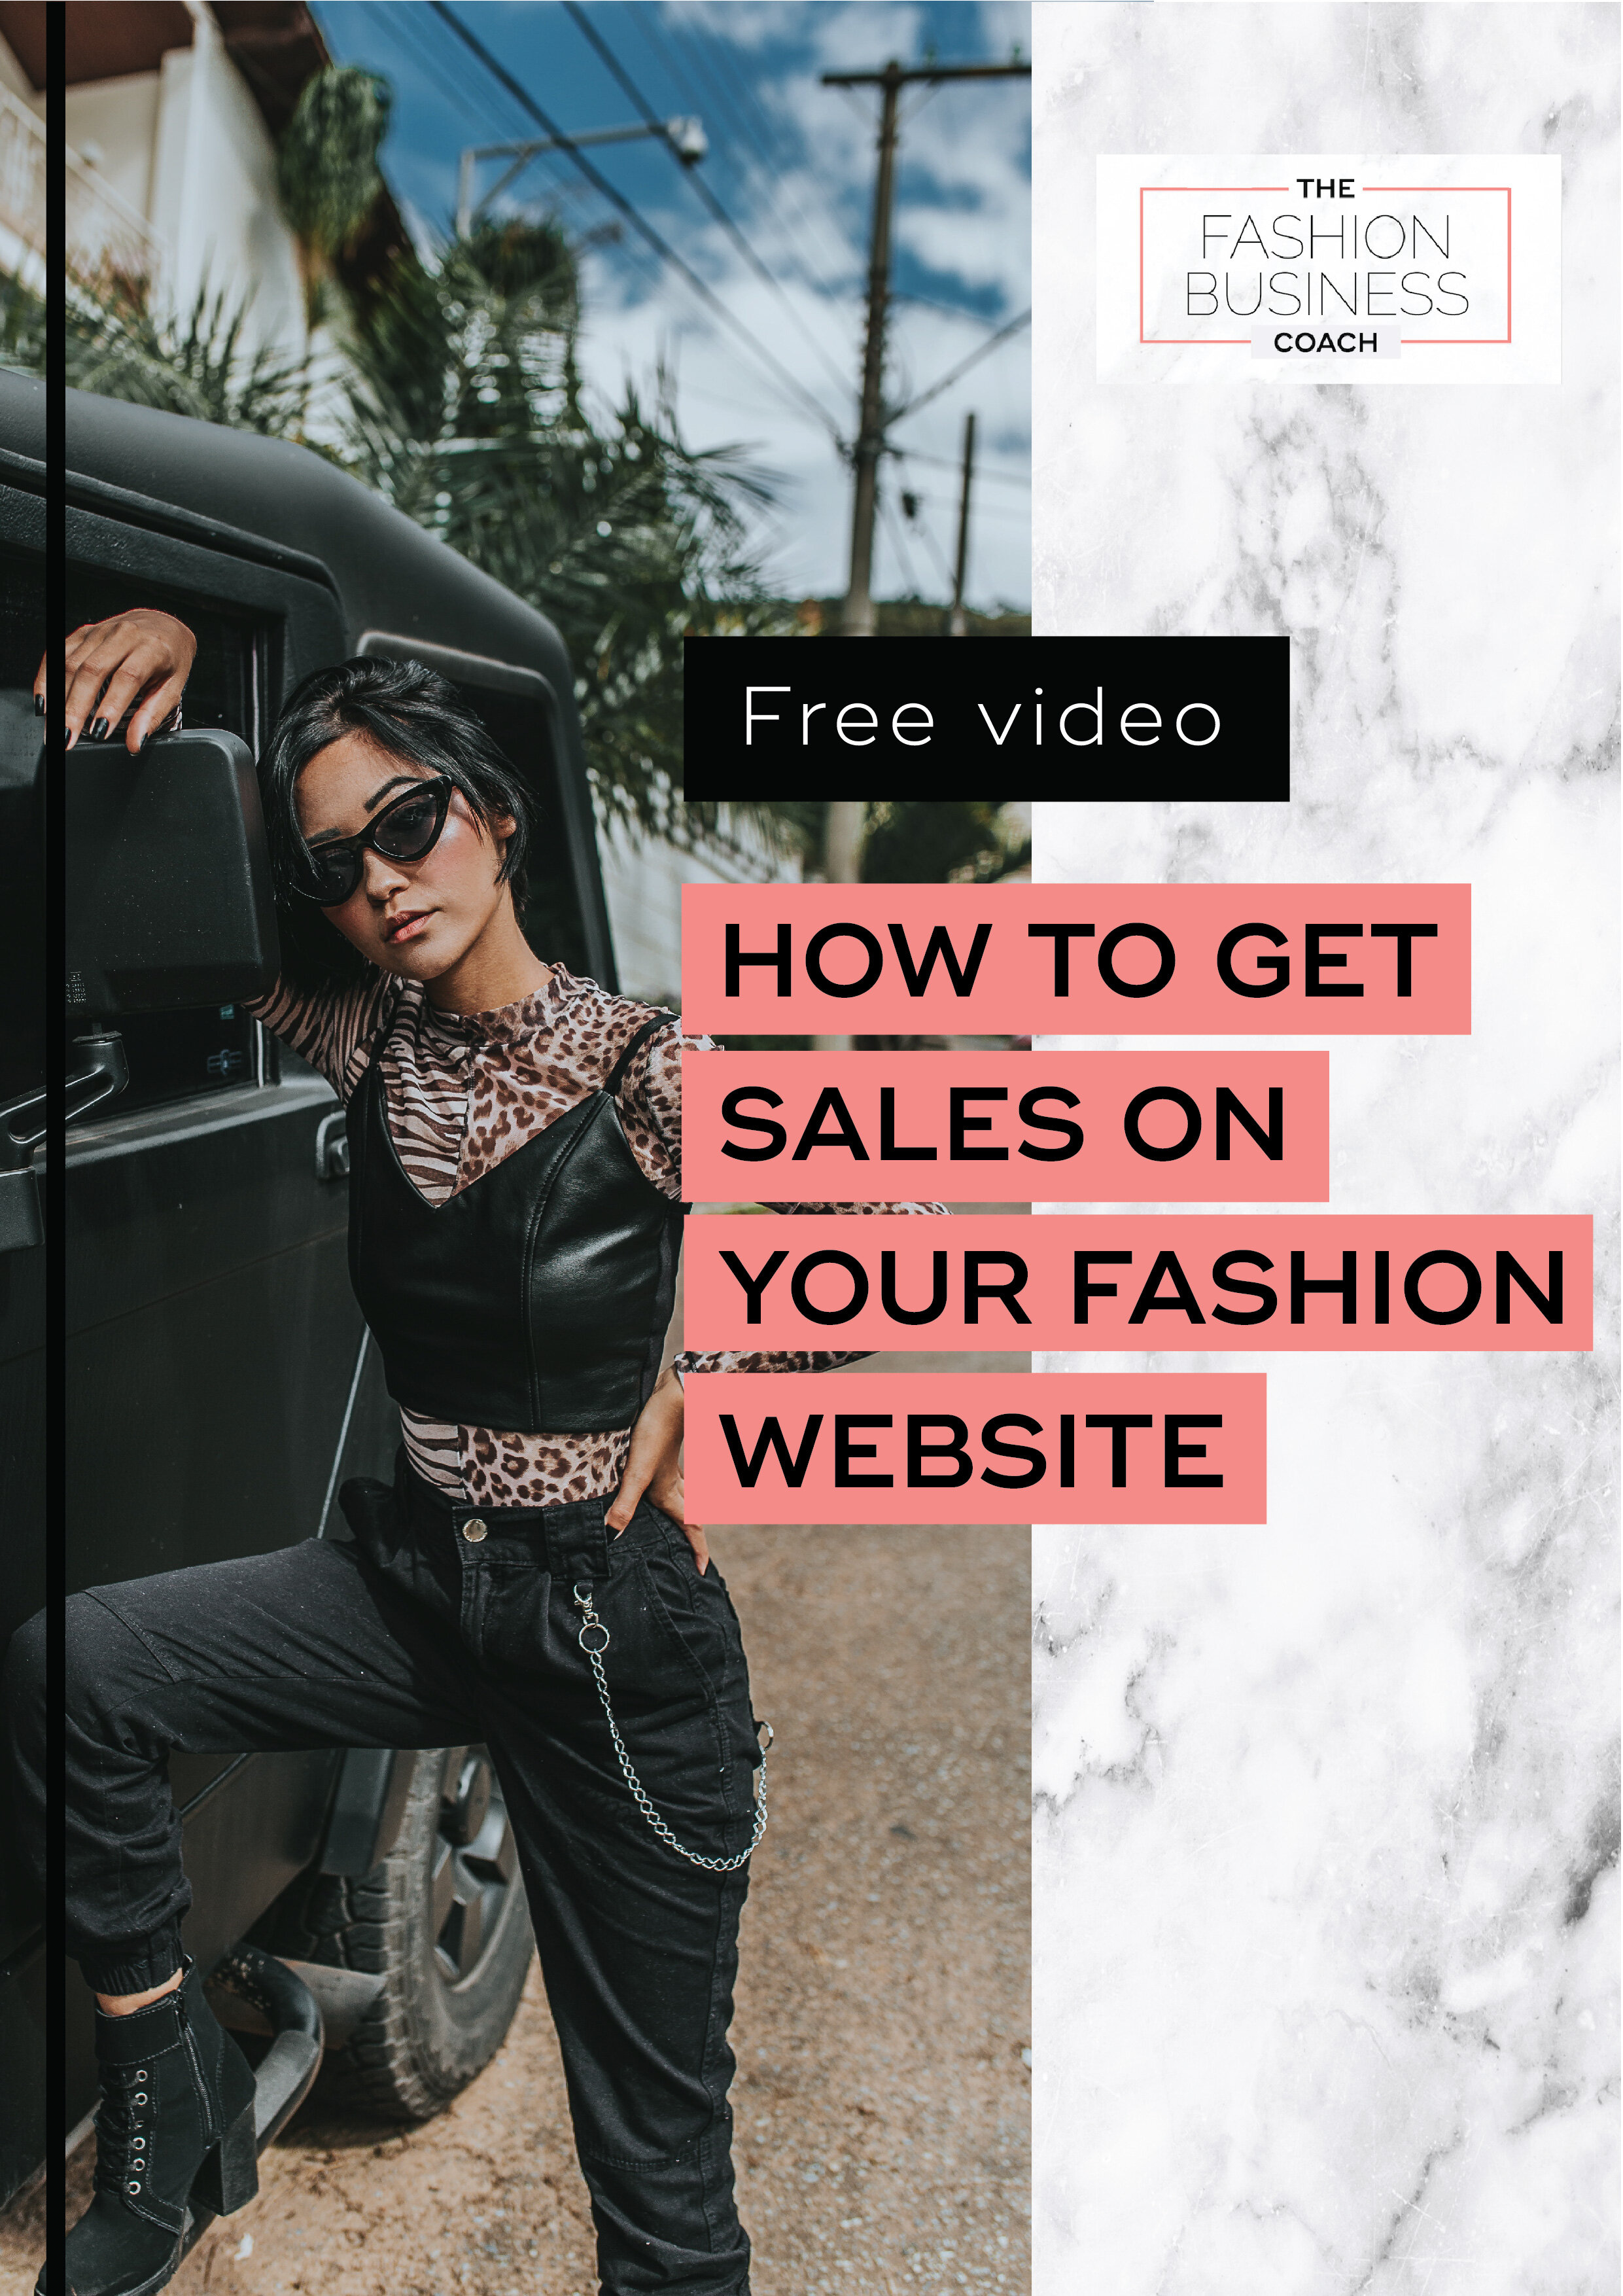 How to Get Sales on Your Fashion Website1.jpg